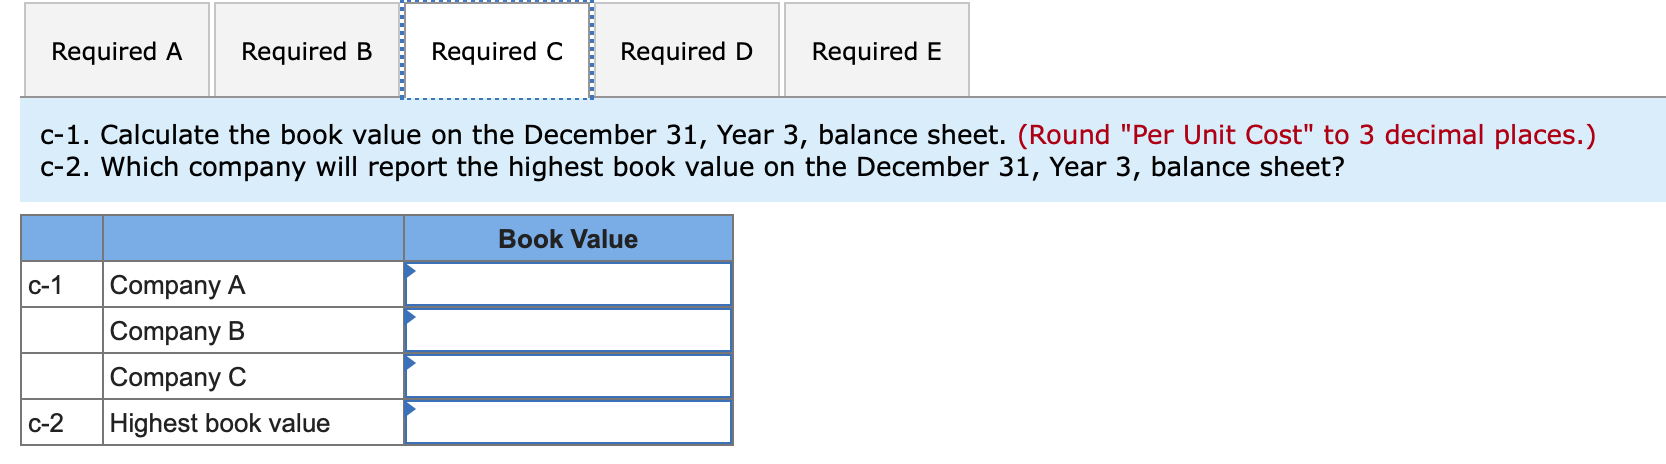 Required ARequired BRequired CRequired DRequired EC-1. Calculate the book value on the December 31, Year 3, balance shee